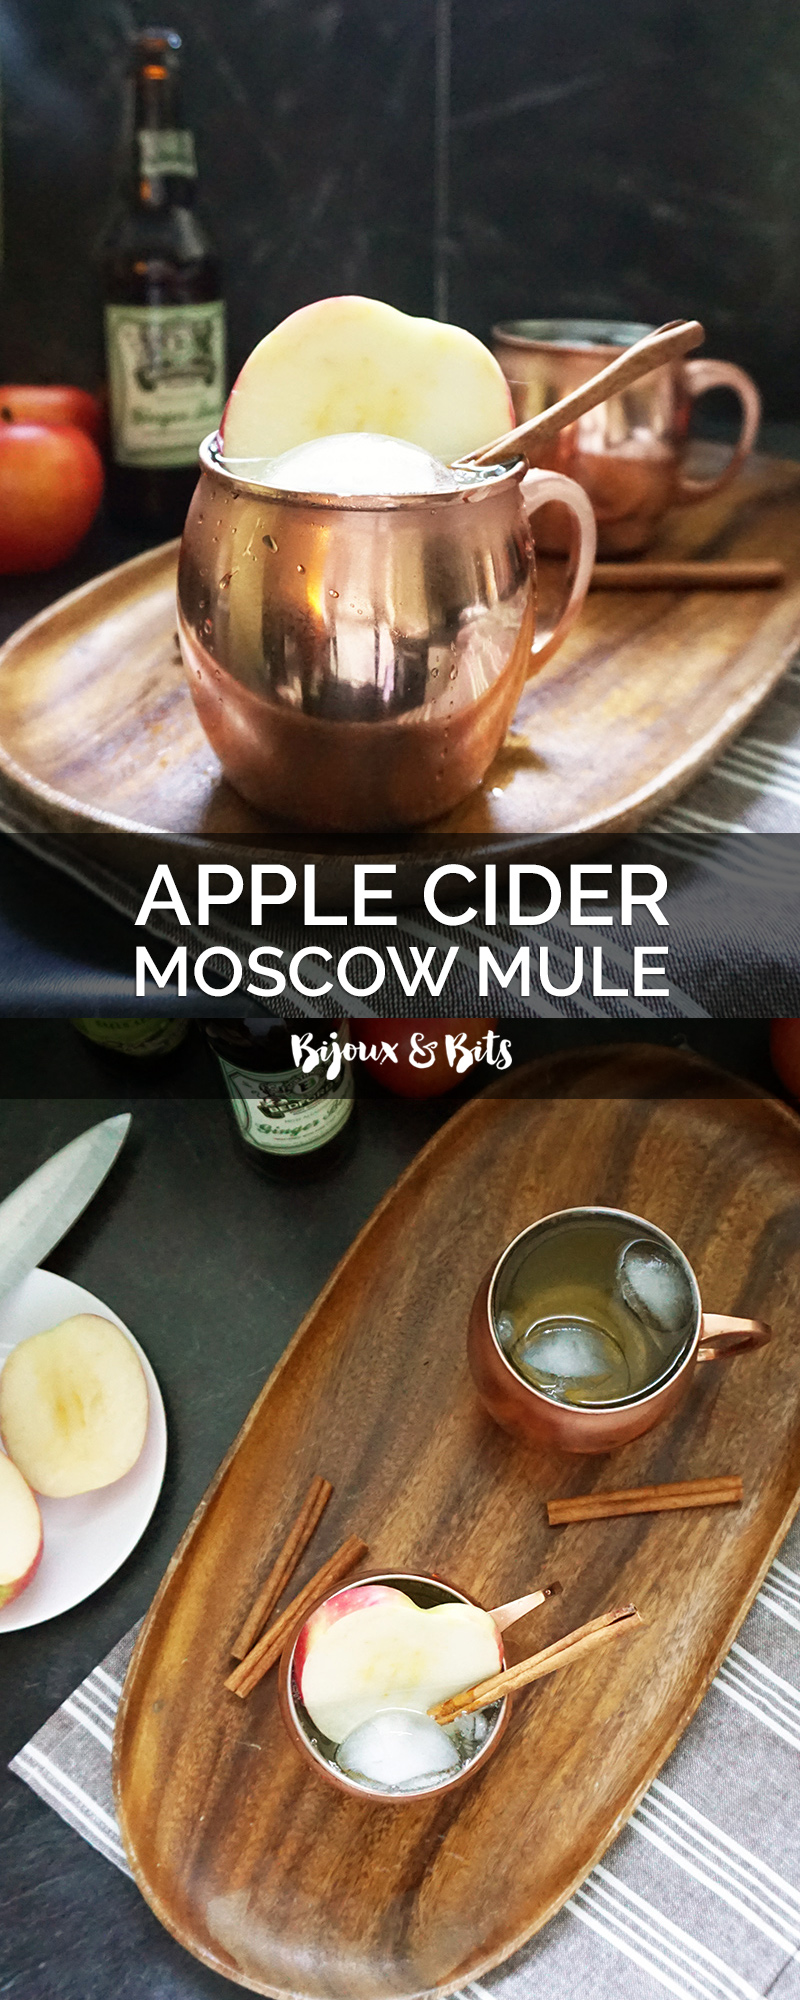 Apple cider Moscow mule recipe from @bijouxandbits